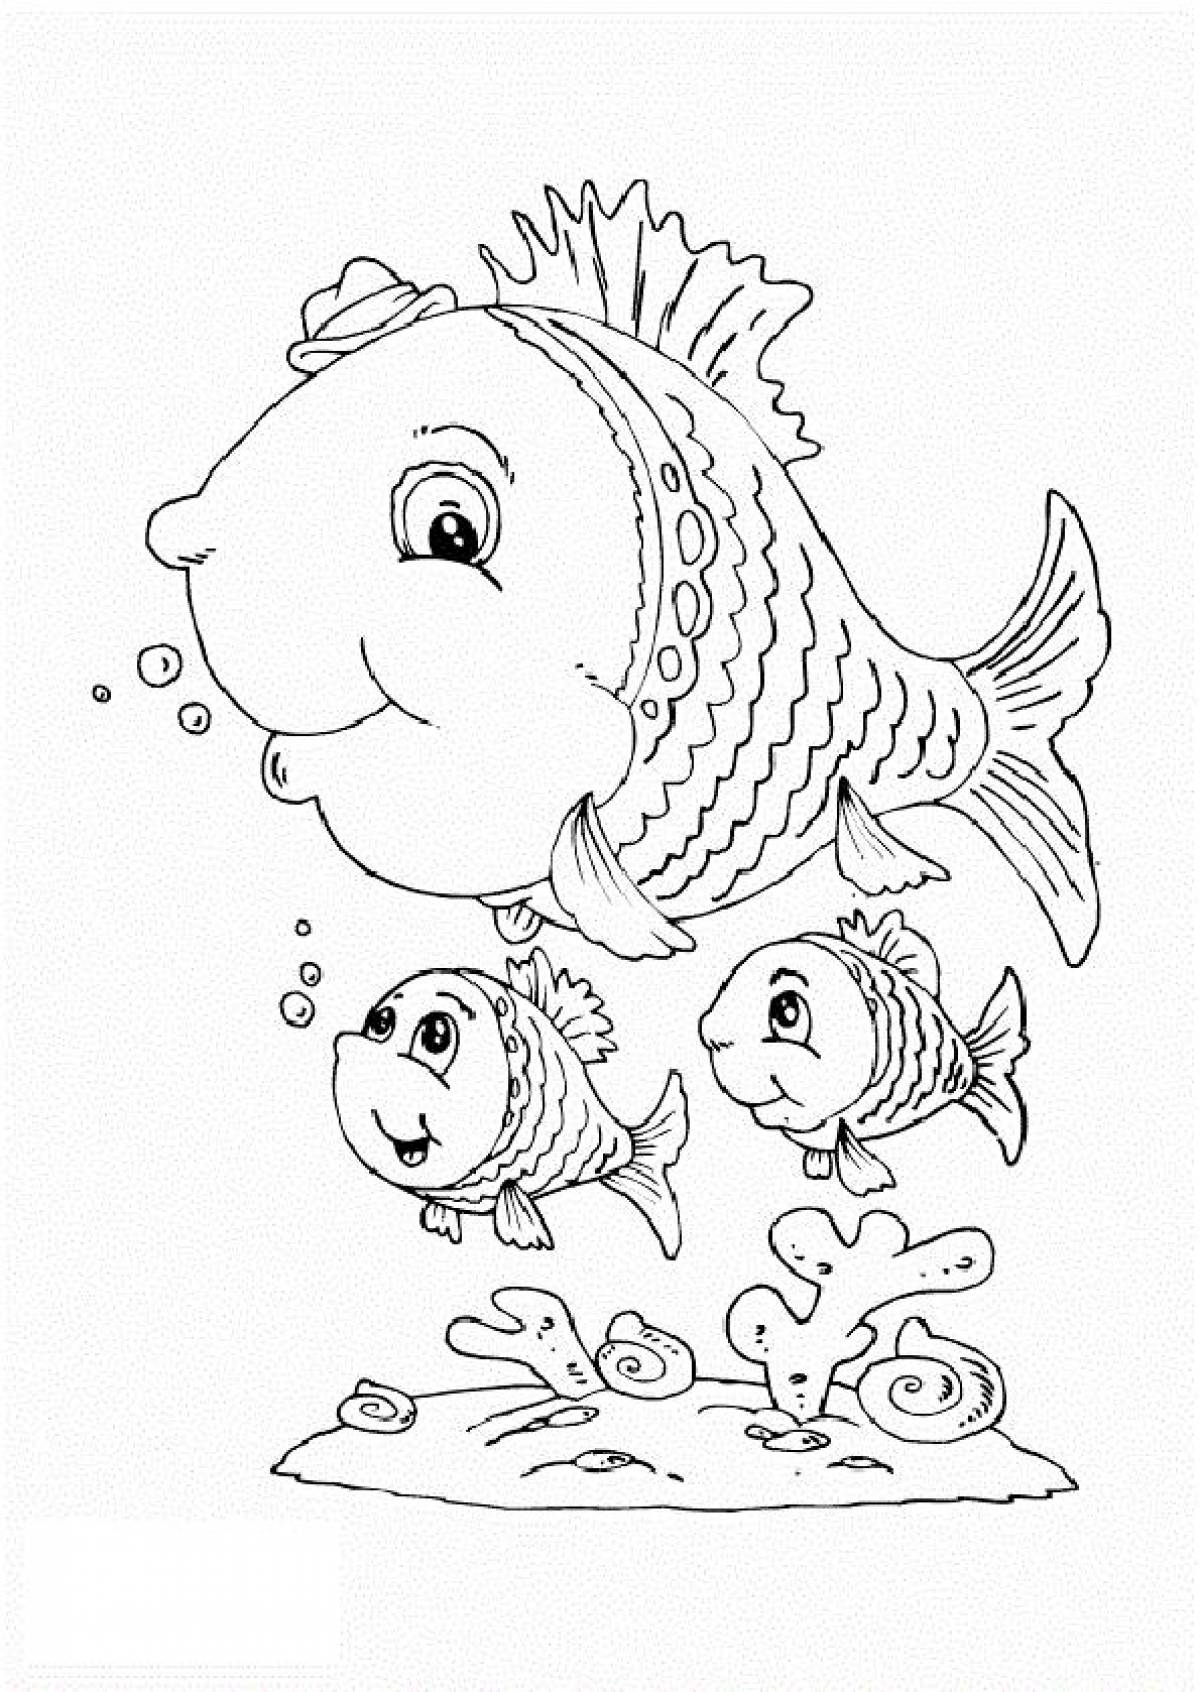 Funny little fishes